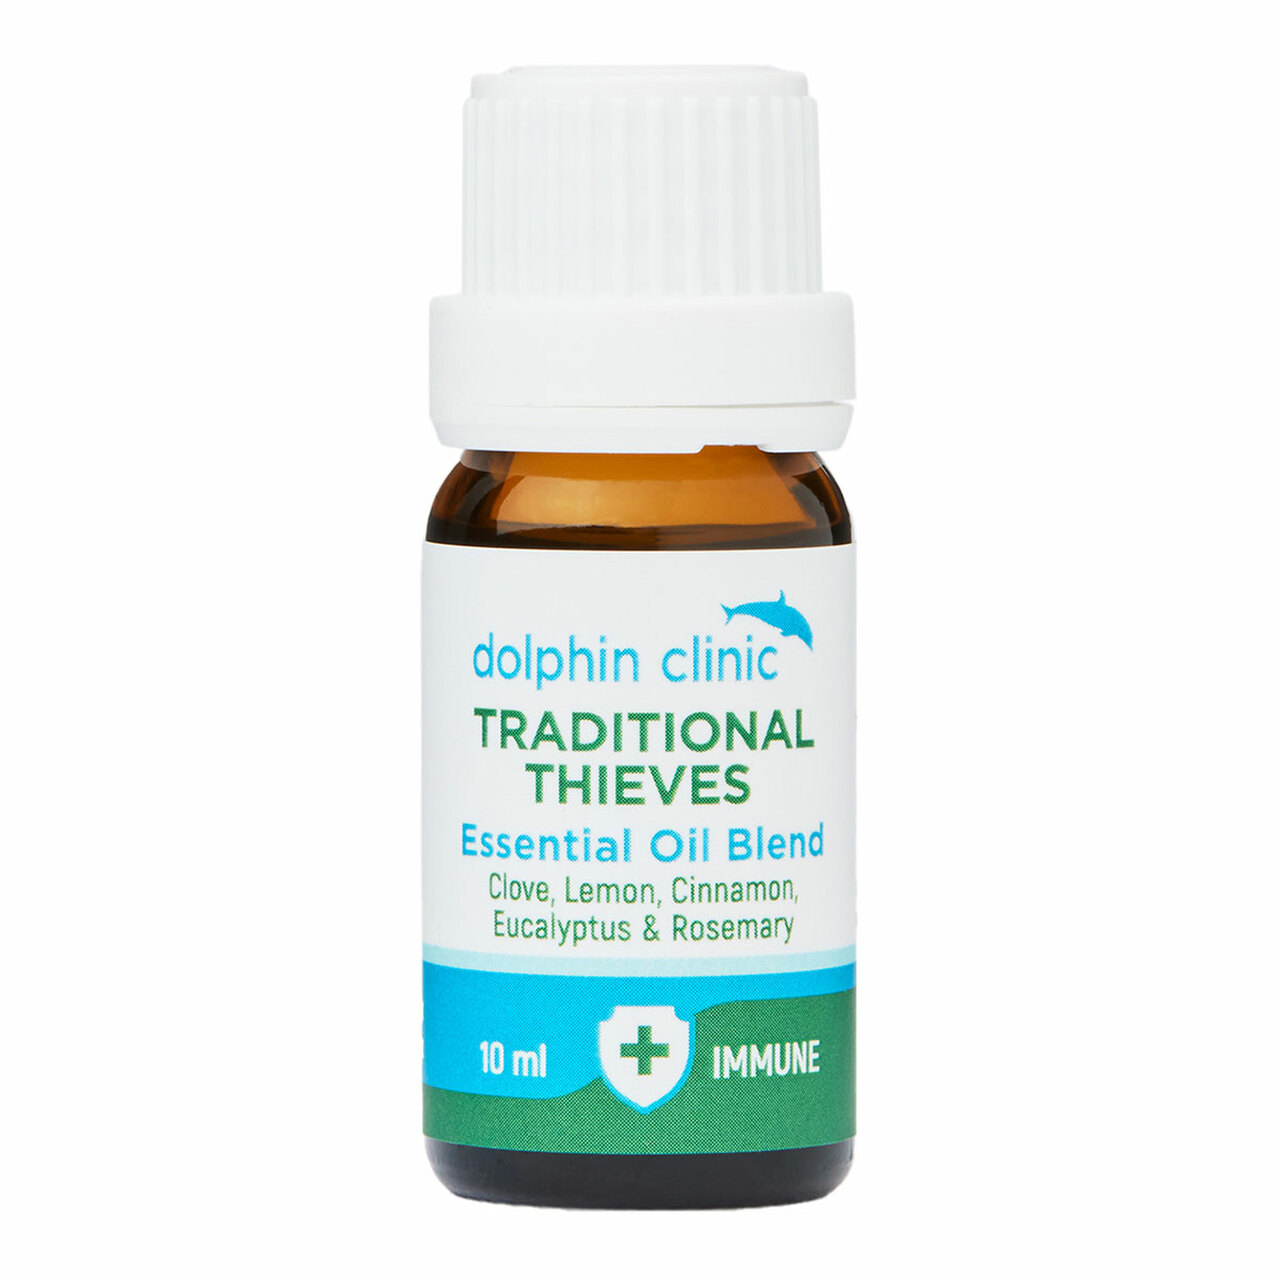 Dolphin Clinic Traditional Thieves Oil Blend 10ml